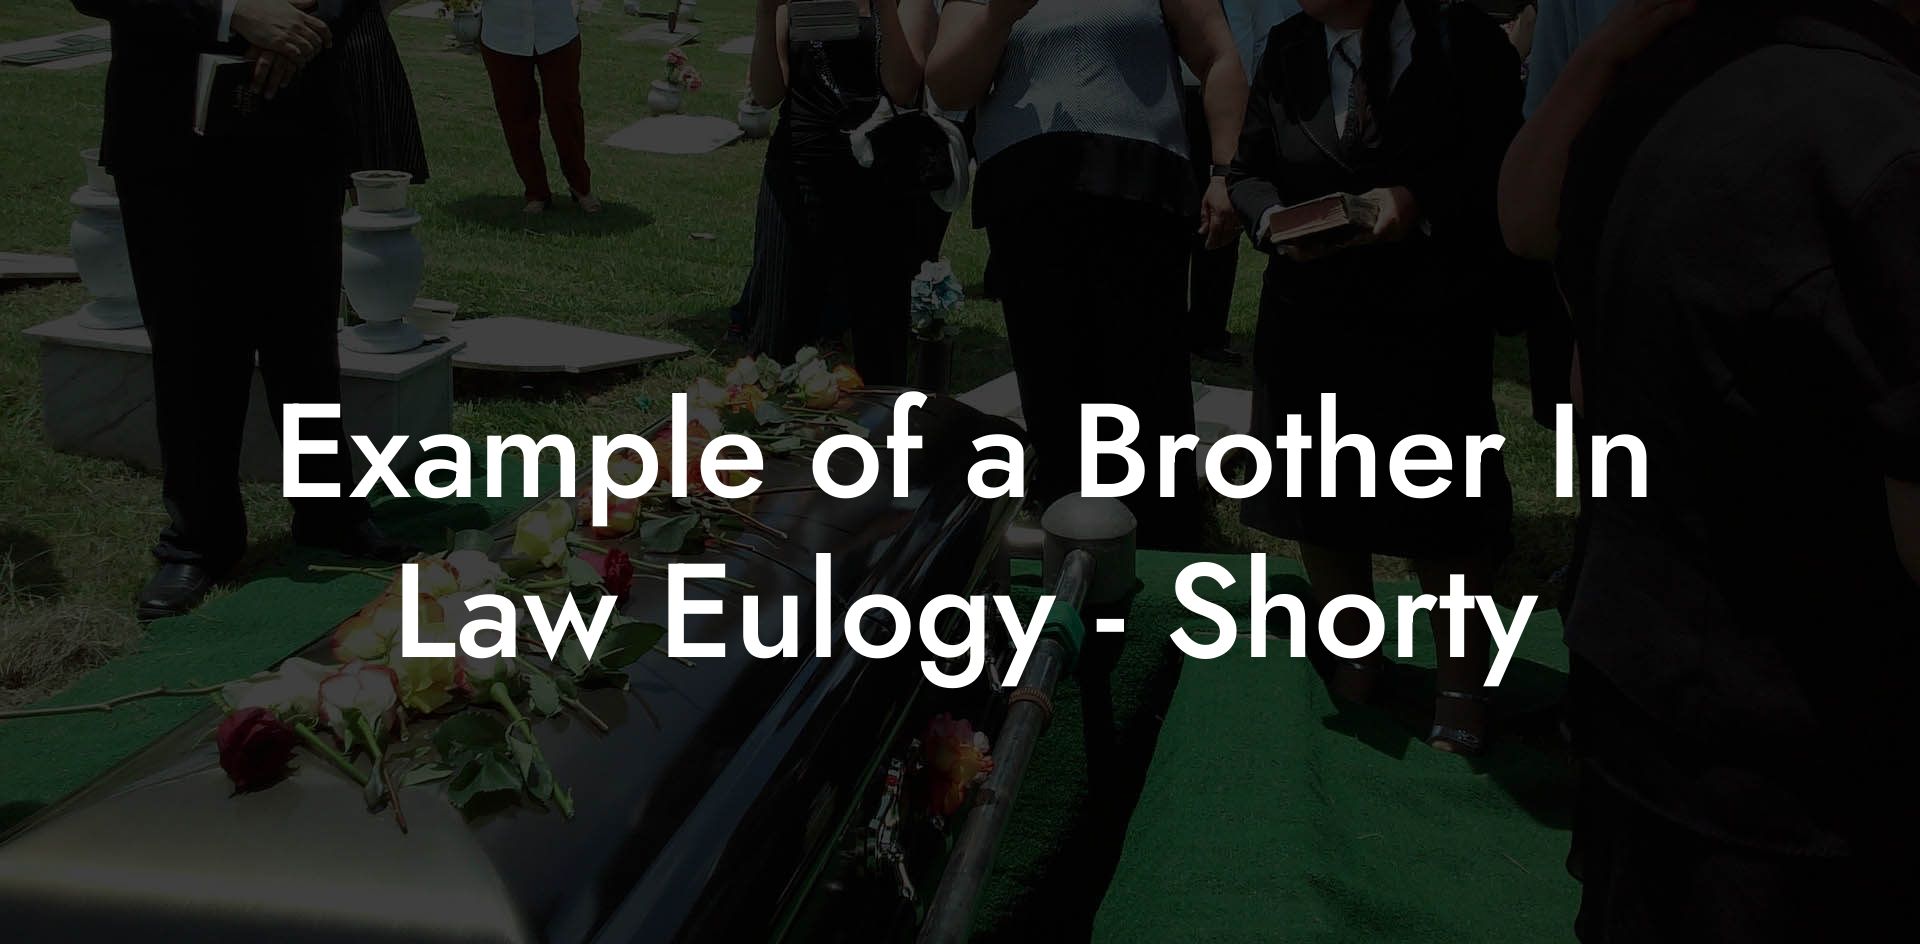 Example of a Brother In Law Eulogy - Shorty